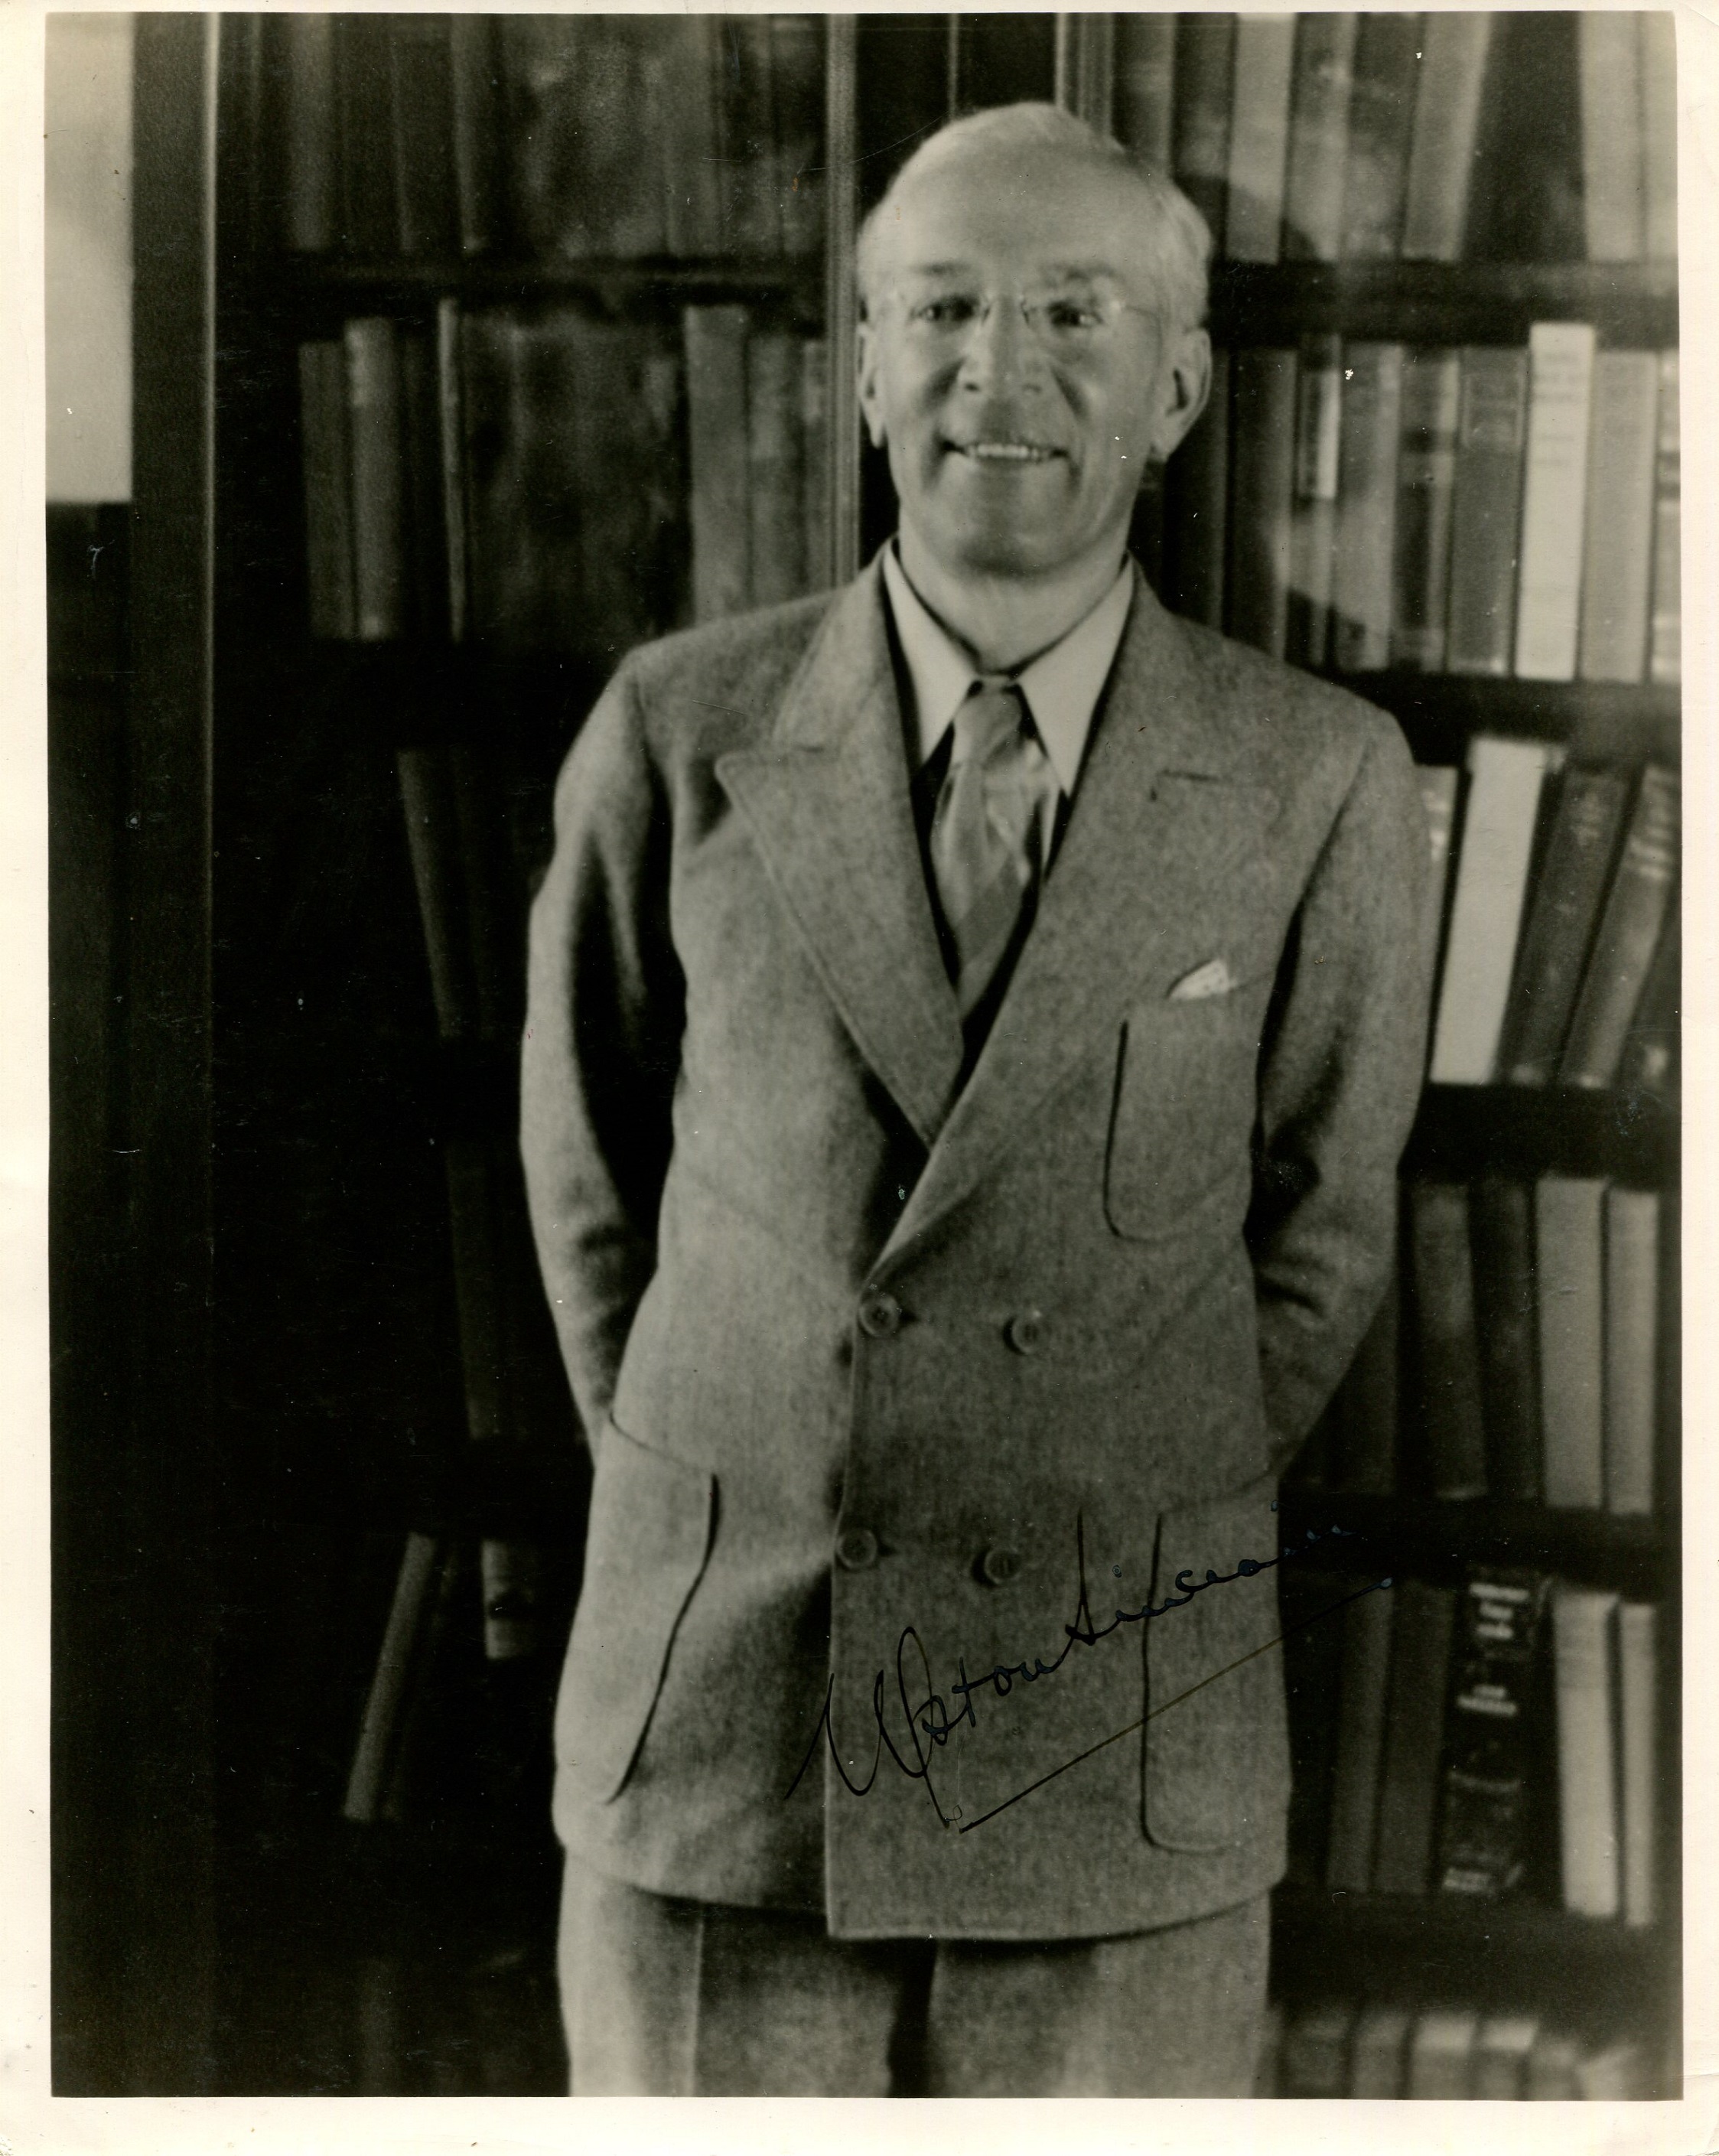 SINCLAIR UPTON: (1878-1968) American writer, Pulitzer Prize winner for Fiction in 1943.